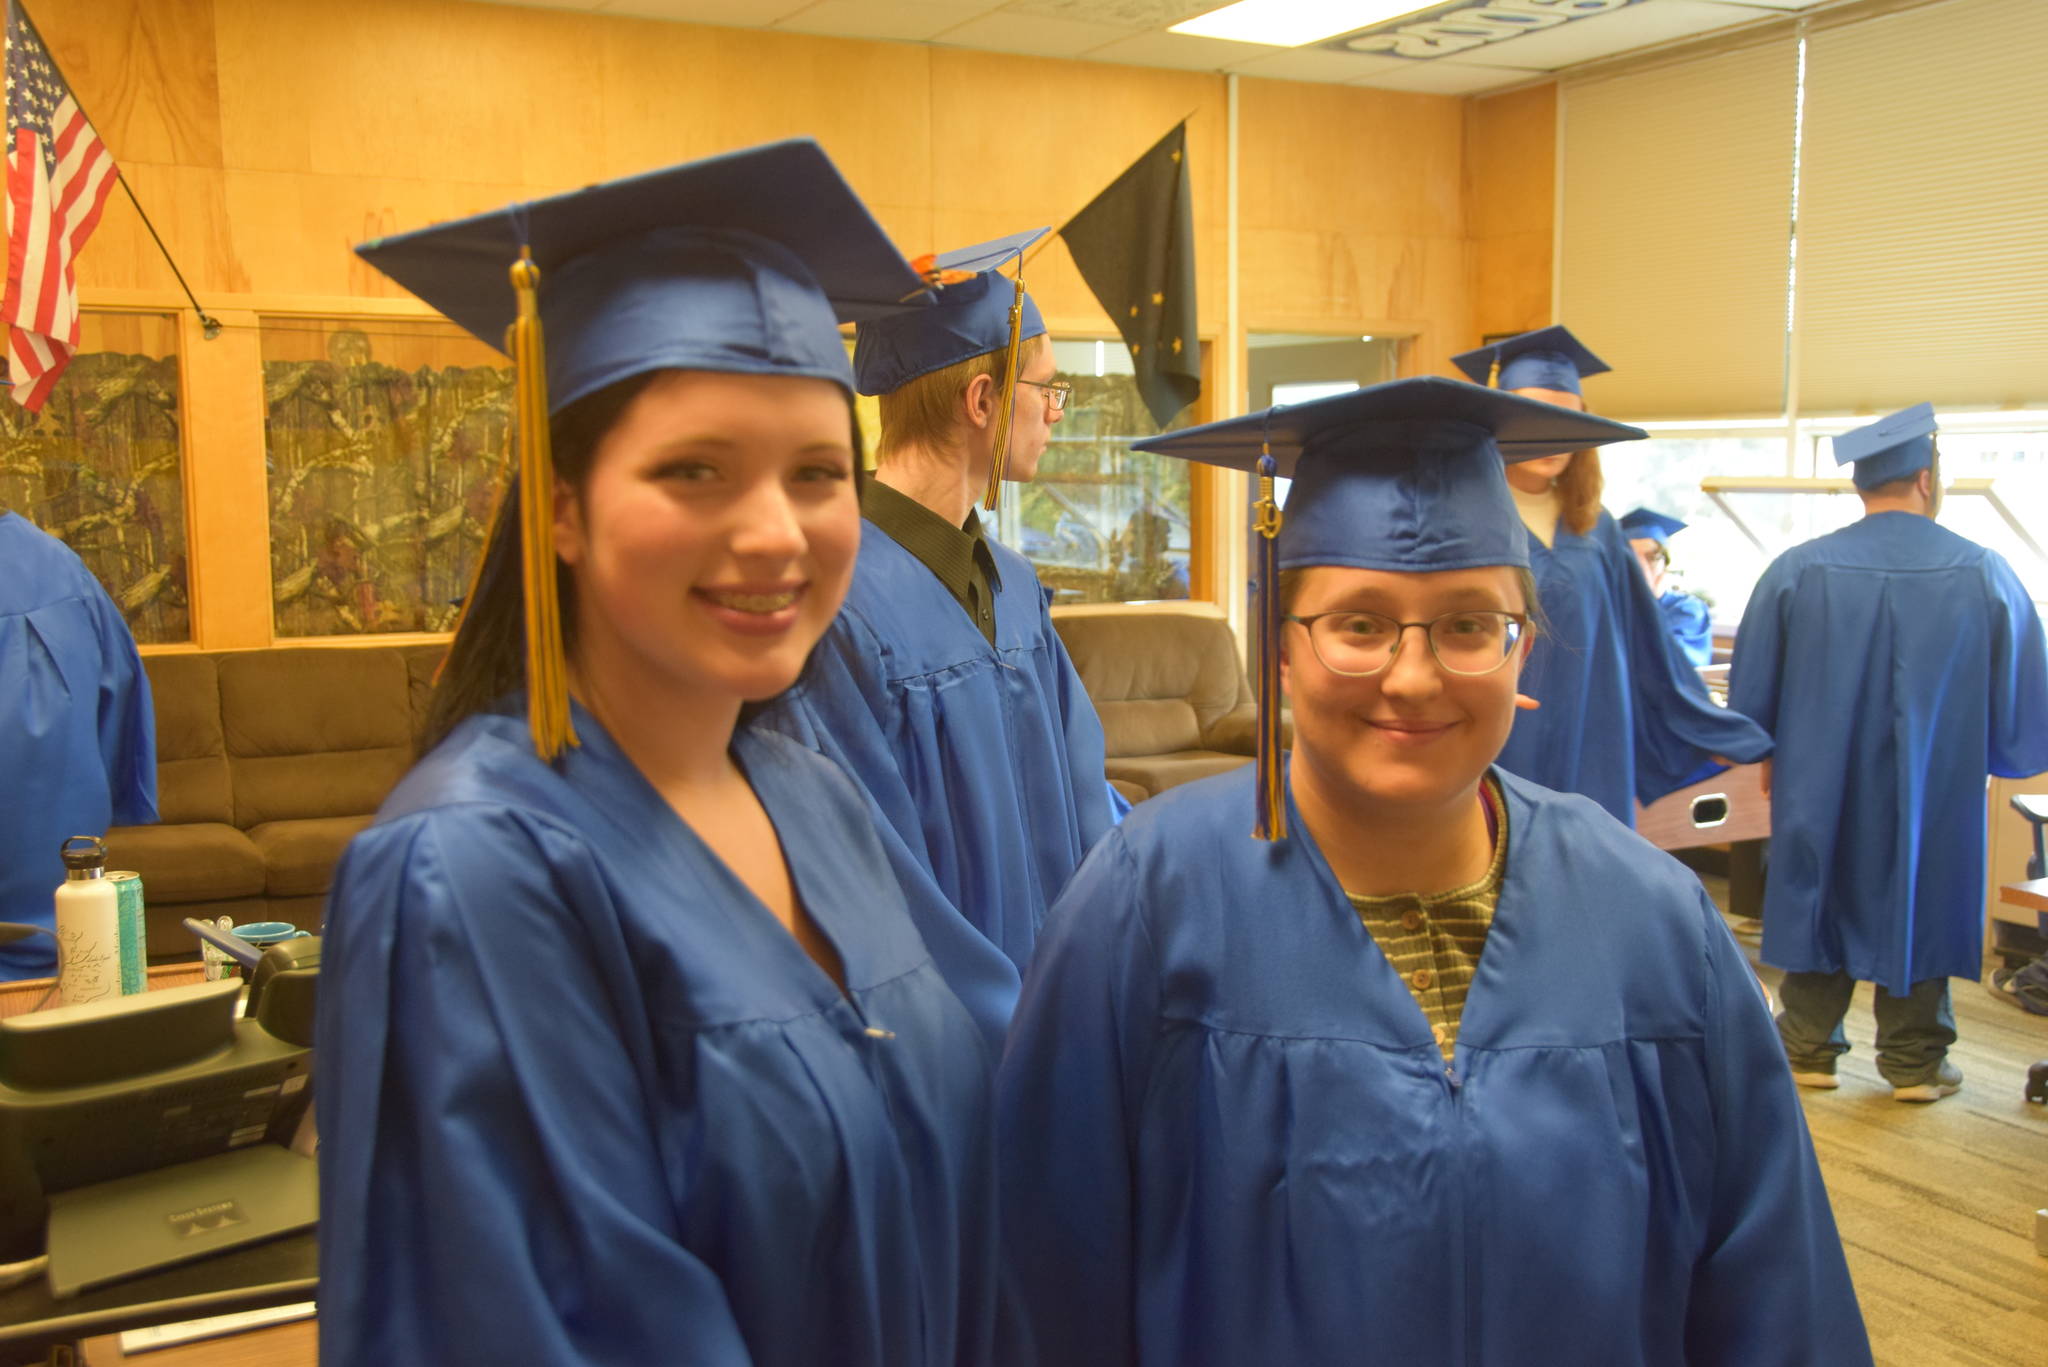 Paige Cruse, left, and Hope Hoadley, right, smile for the camera during the Kenai Alternative High School 2019 graduation in Kenai, Alaska on May 22, 2019. (Photo by Brian Mazurek/Peninsula Clarion)